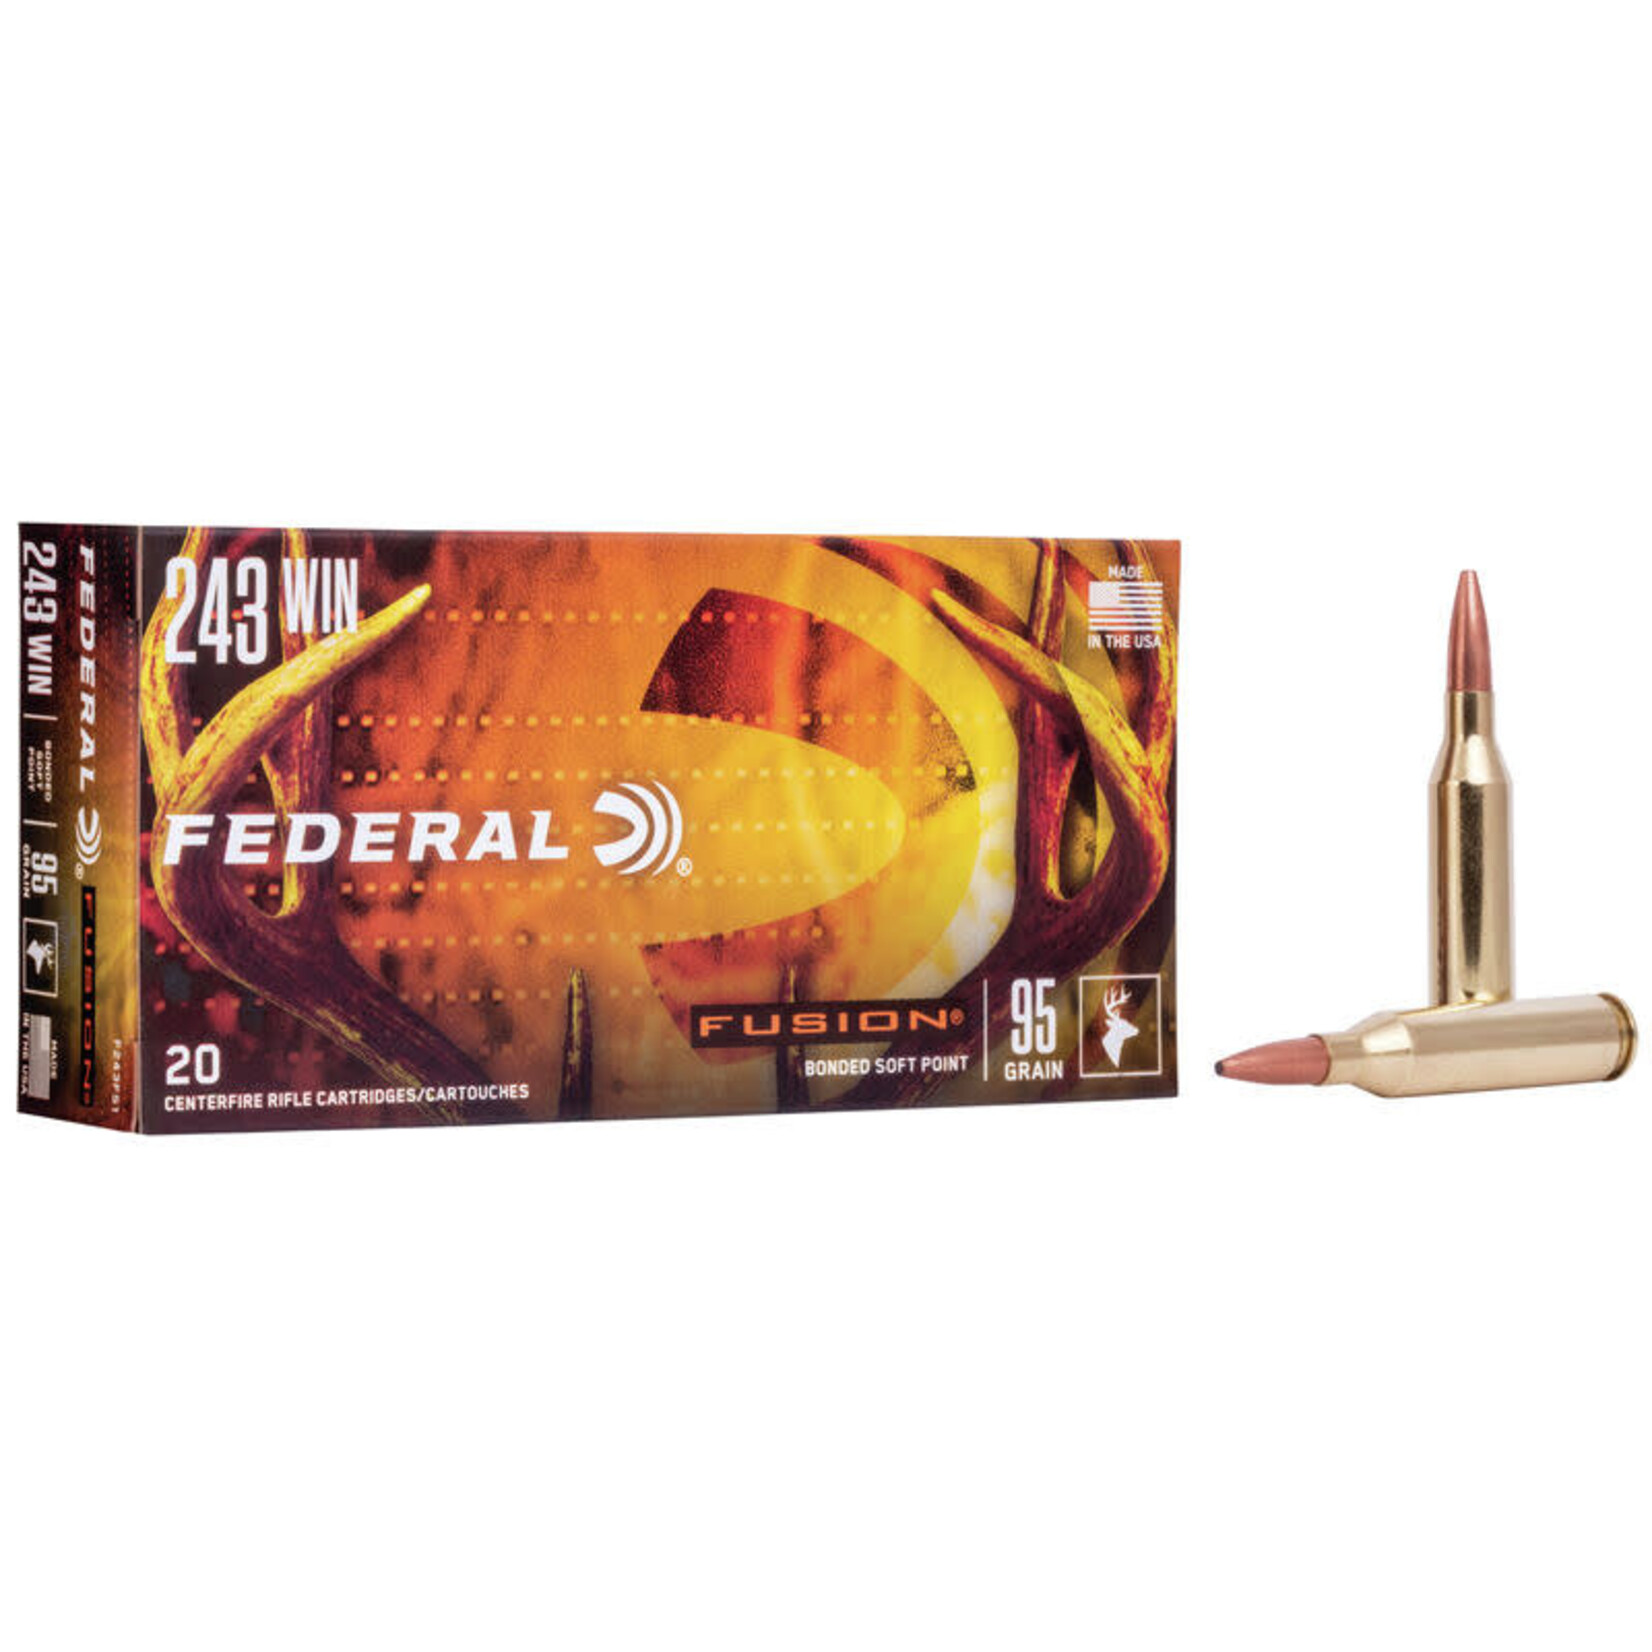 FEDERAL Munitions Federal Fusion Cal.243Win 95Gr